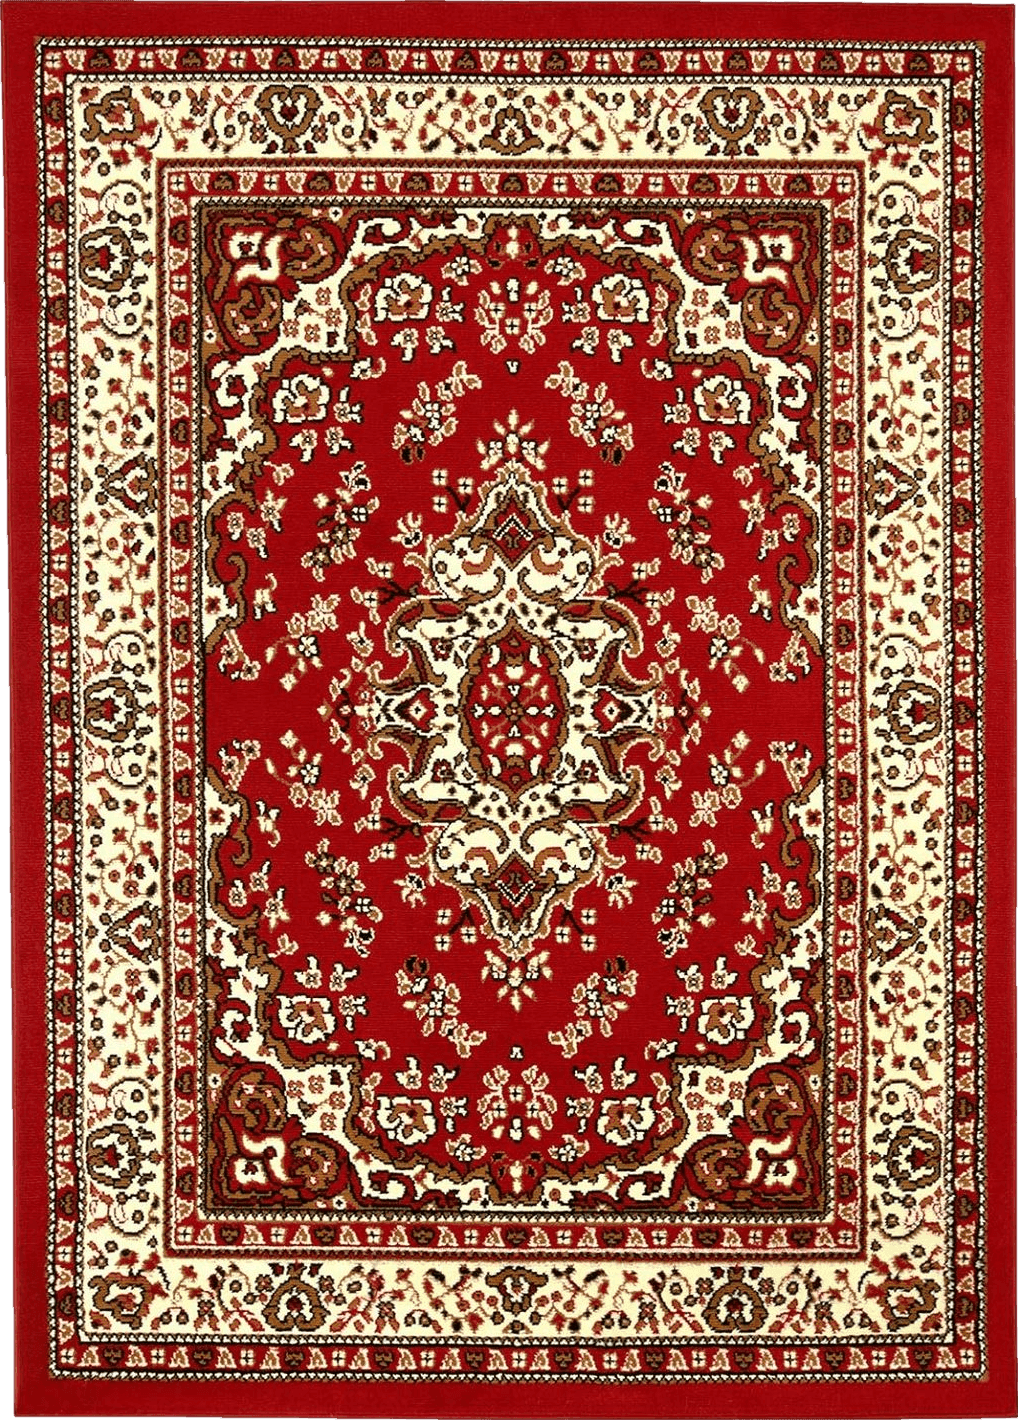 Antep Rugs Kashan King Collection HIMALAYAS Oriental Area Rug Maroon and Beige - Maroon and Beige - 8' x 10'